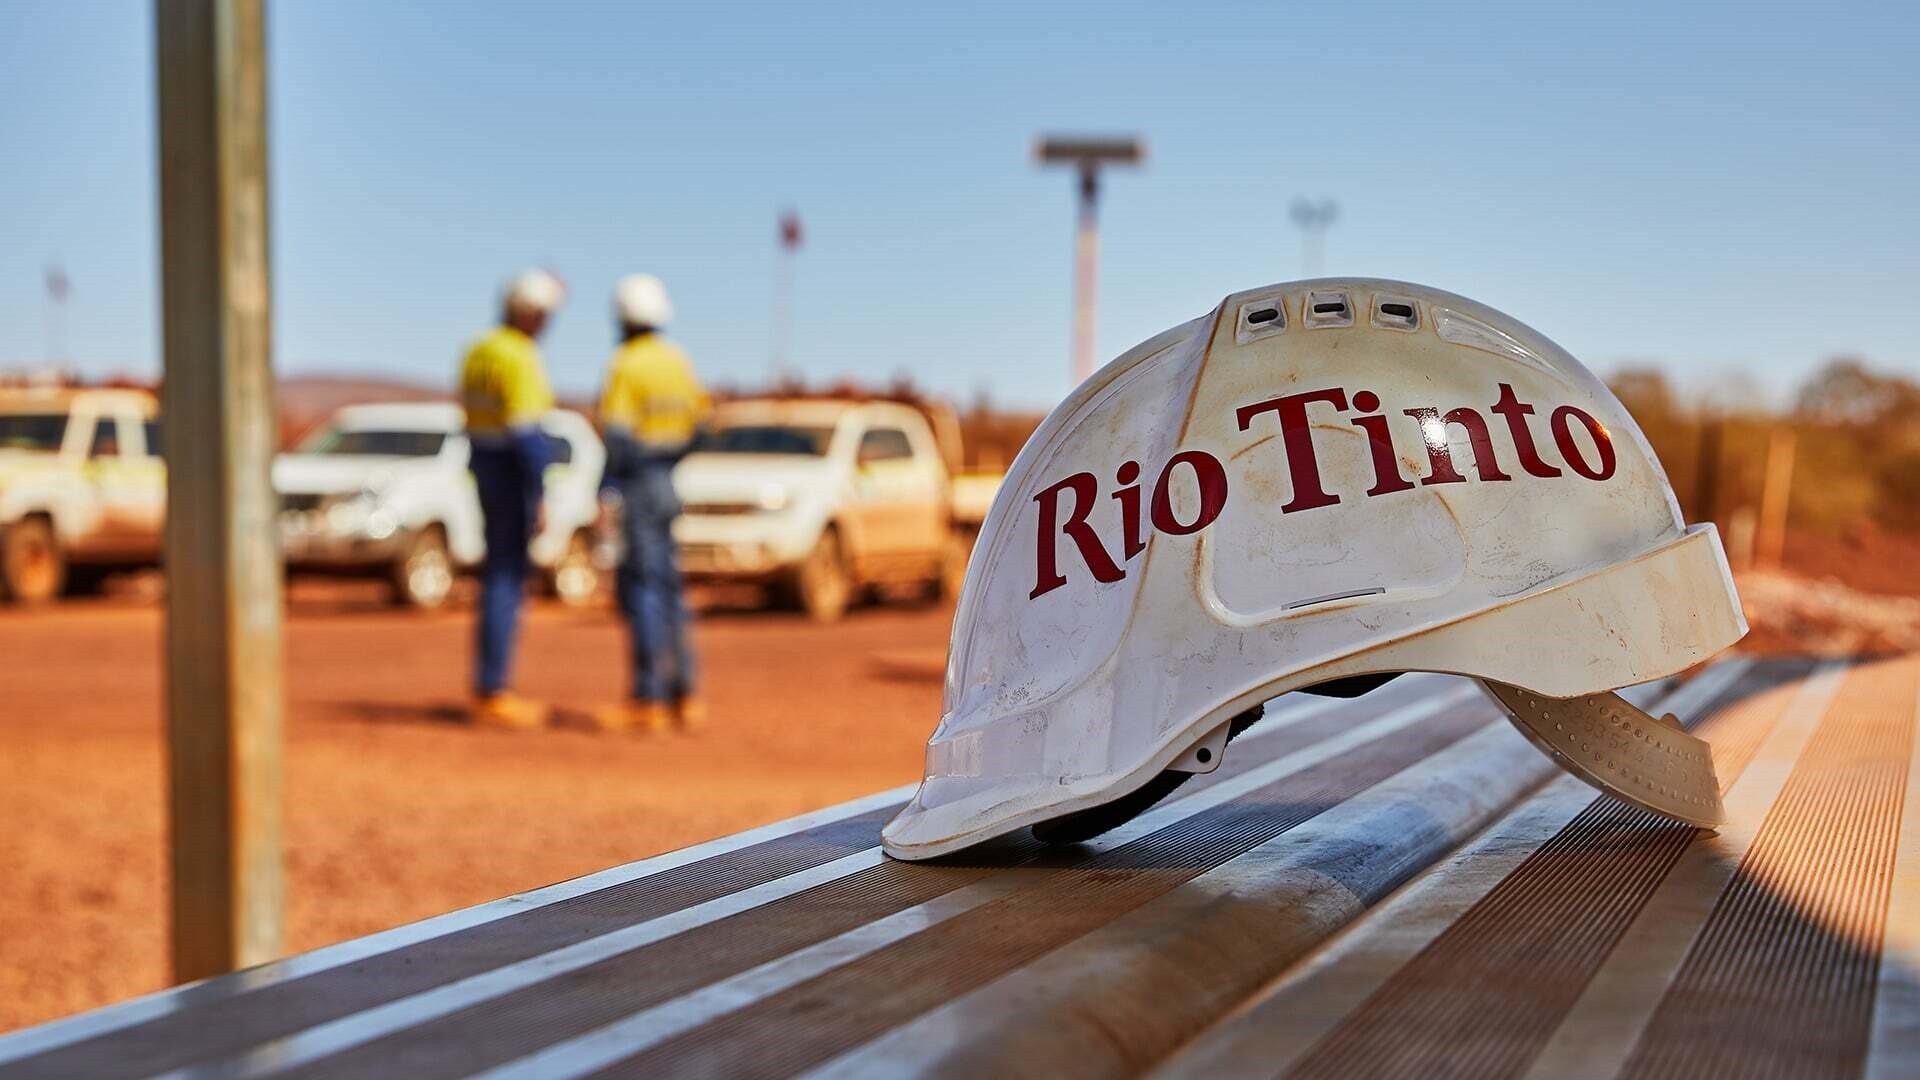 Rio Tinto partners with a startup investor to drive technology innovations in the mining industry